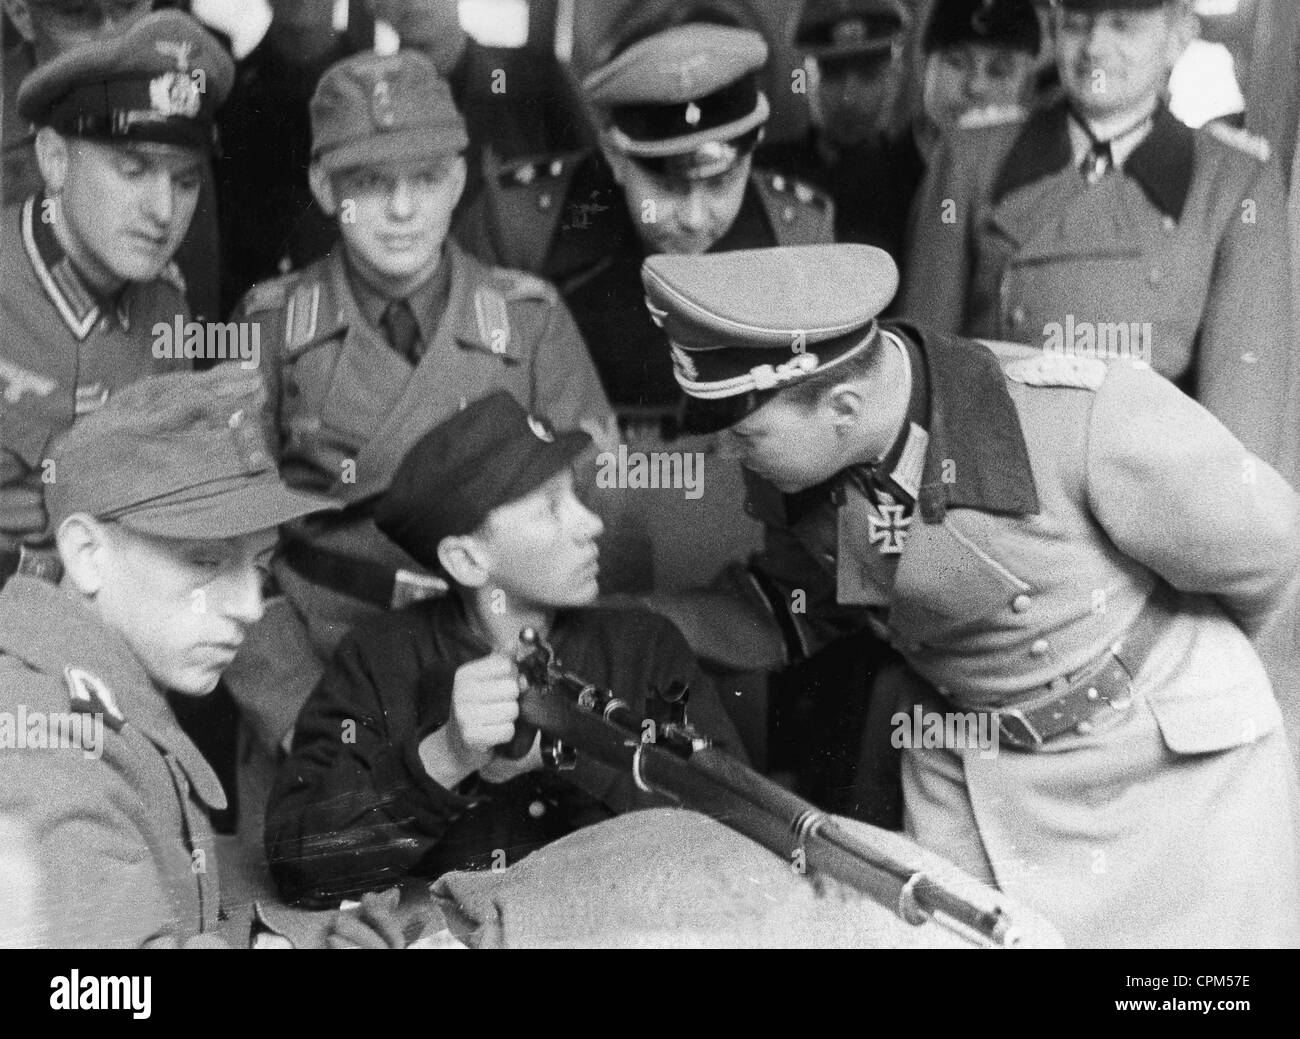 Training of Hitler Youth members during the Second World War, 1944 Stock Photo